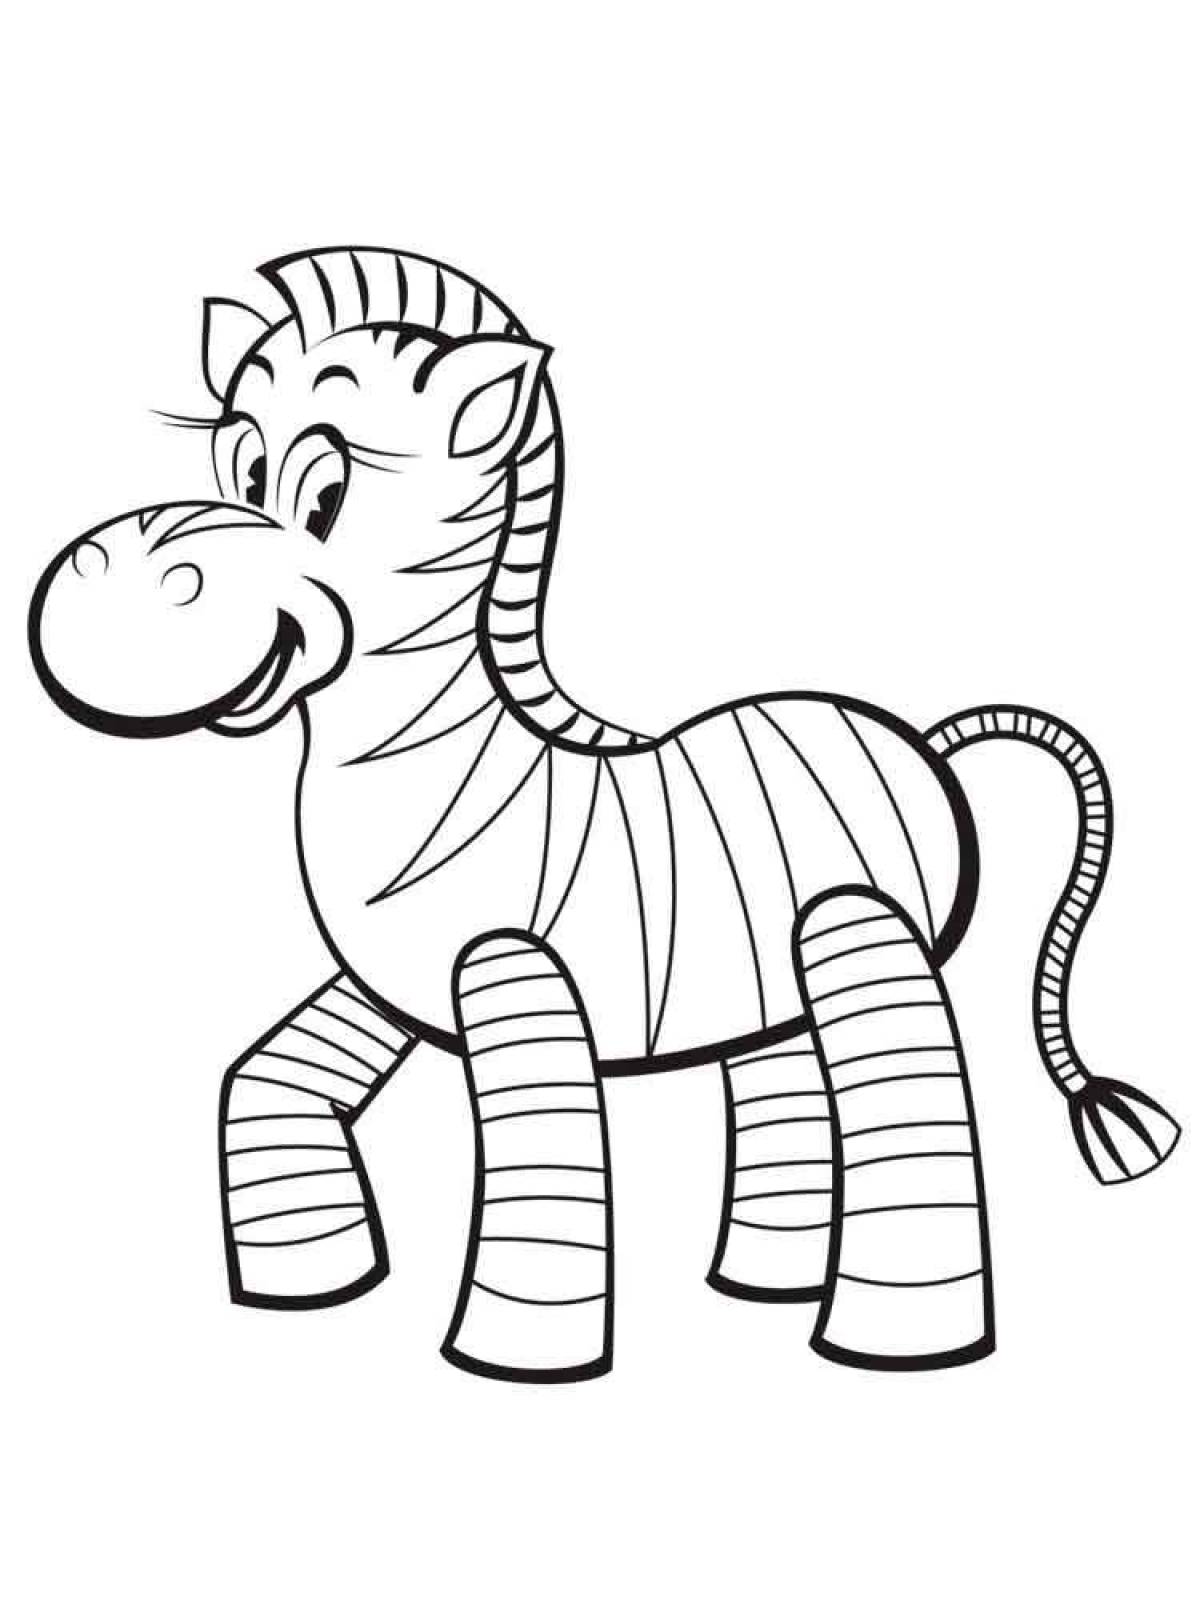 Colorful bright zebra coloring page for kids